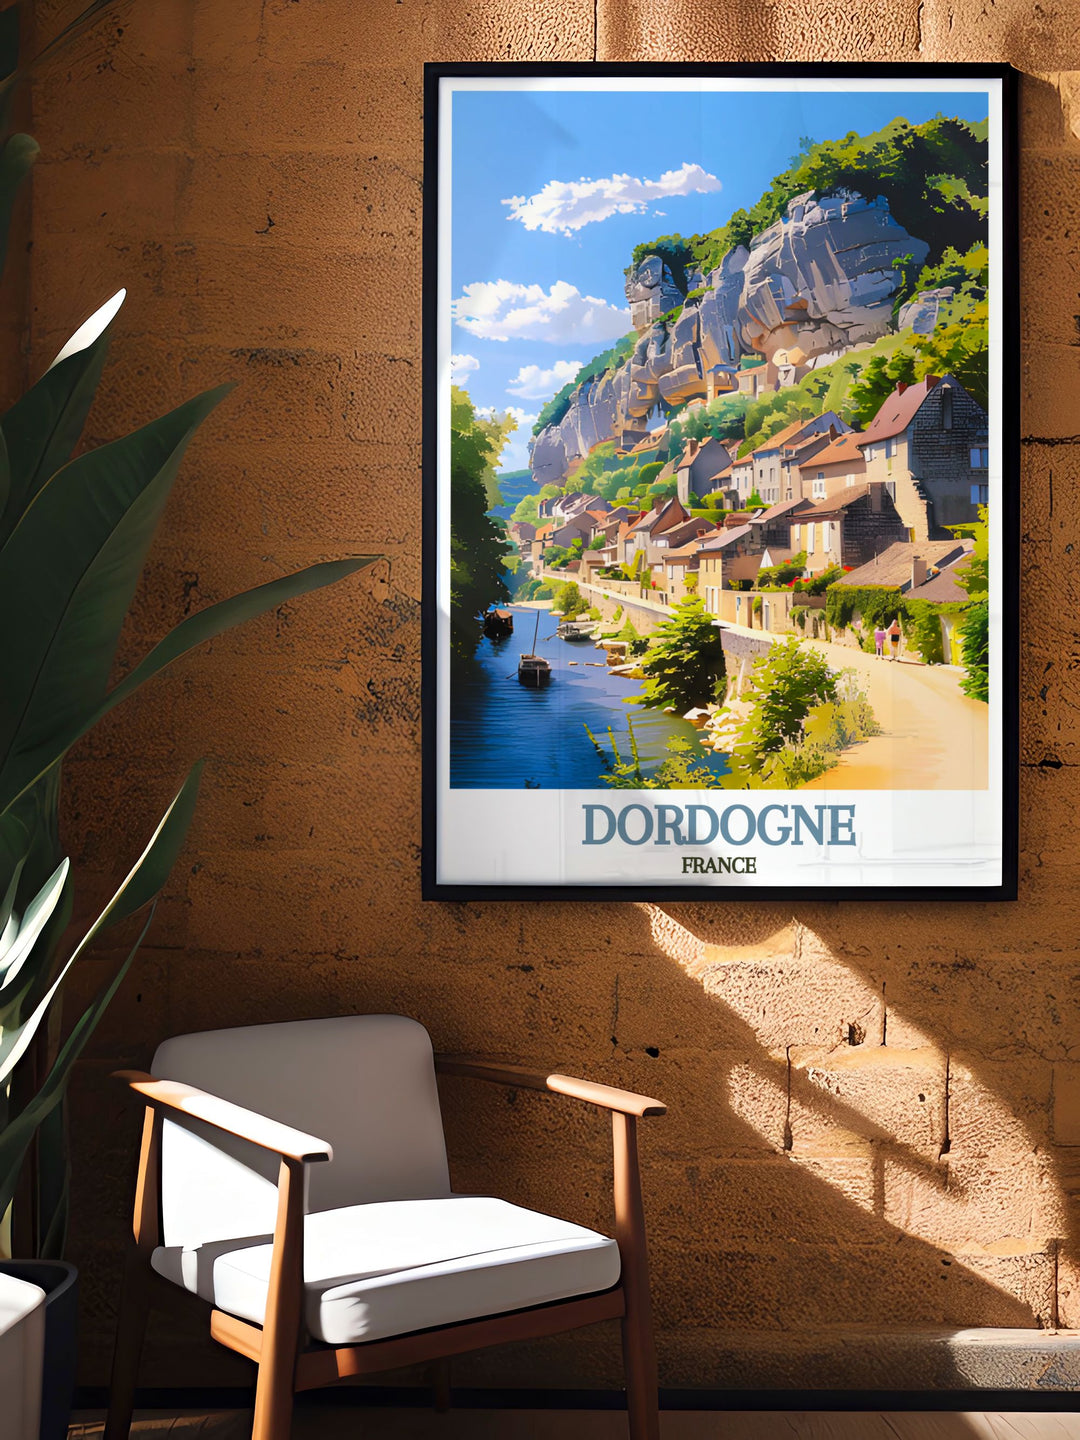 La Roque Gageac is beautifully illustrated in this travel poster, capturing its cliffside dwellings and scenic beauty, perfect for enhancing your living space.